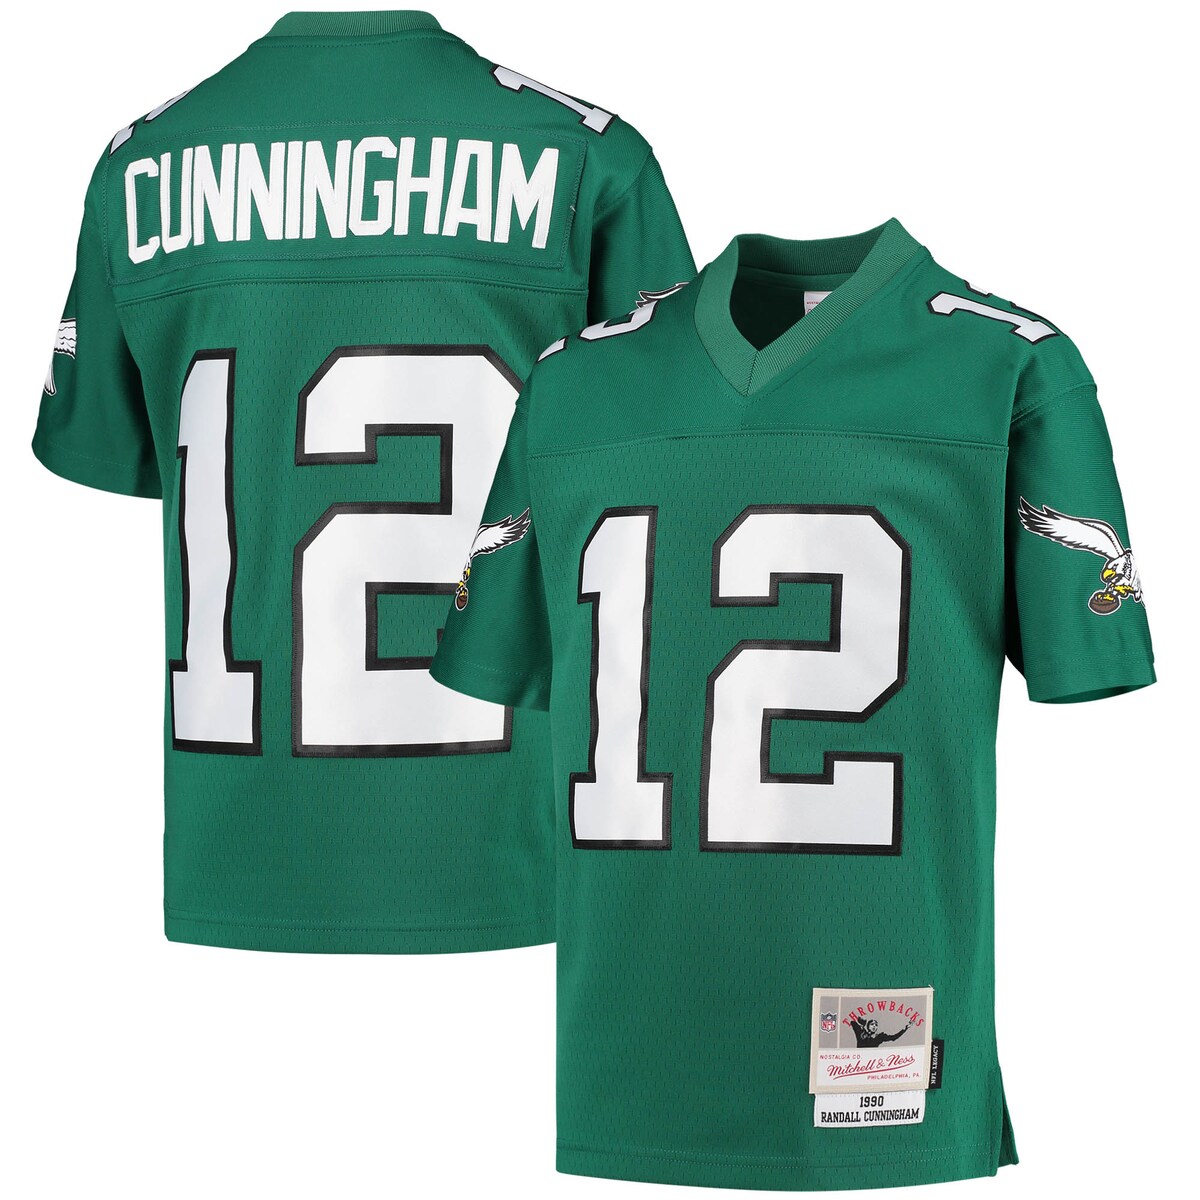 Help your kiddo rep one of the greatest players in Philadelphia Eagles history with this Retired Player Legacy jersey from Mitchell & Ness. Its throwback design is inspired by the uniform Randall Cunningham wore during his memorable seasons with the franchise. This jersey's remarkably detailed graphics and stitching will help bring back all those cherished memories of watching Randall Cunningham lead the Philadelphia Eagles onto the gridiron.Machine wash with garment inside out, tumble dry lowMaterial: 100% PolyesterImportedMesh bodyReplica Throwback JerseyBrand: Mitchell & NessSatin twill woven jock tagShort sleeveSleeves with screen print graphicStitched tackle twill name and numbersStraight hem with side splitsV-neckOfficially licensed